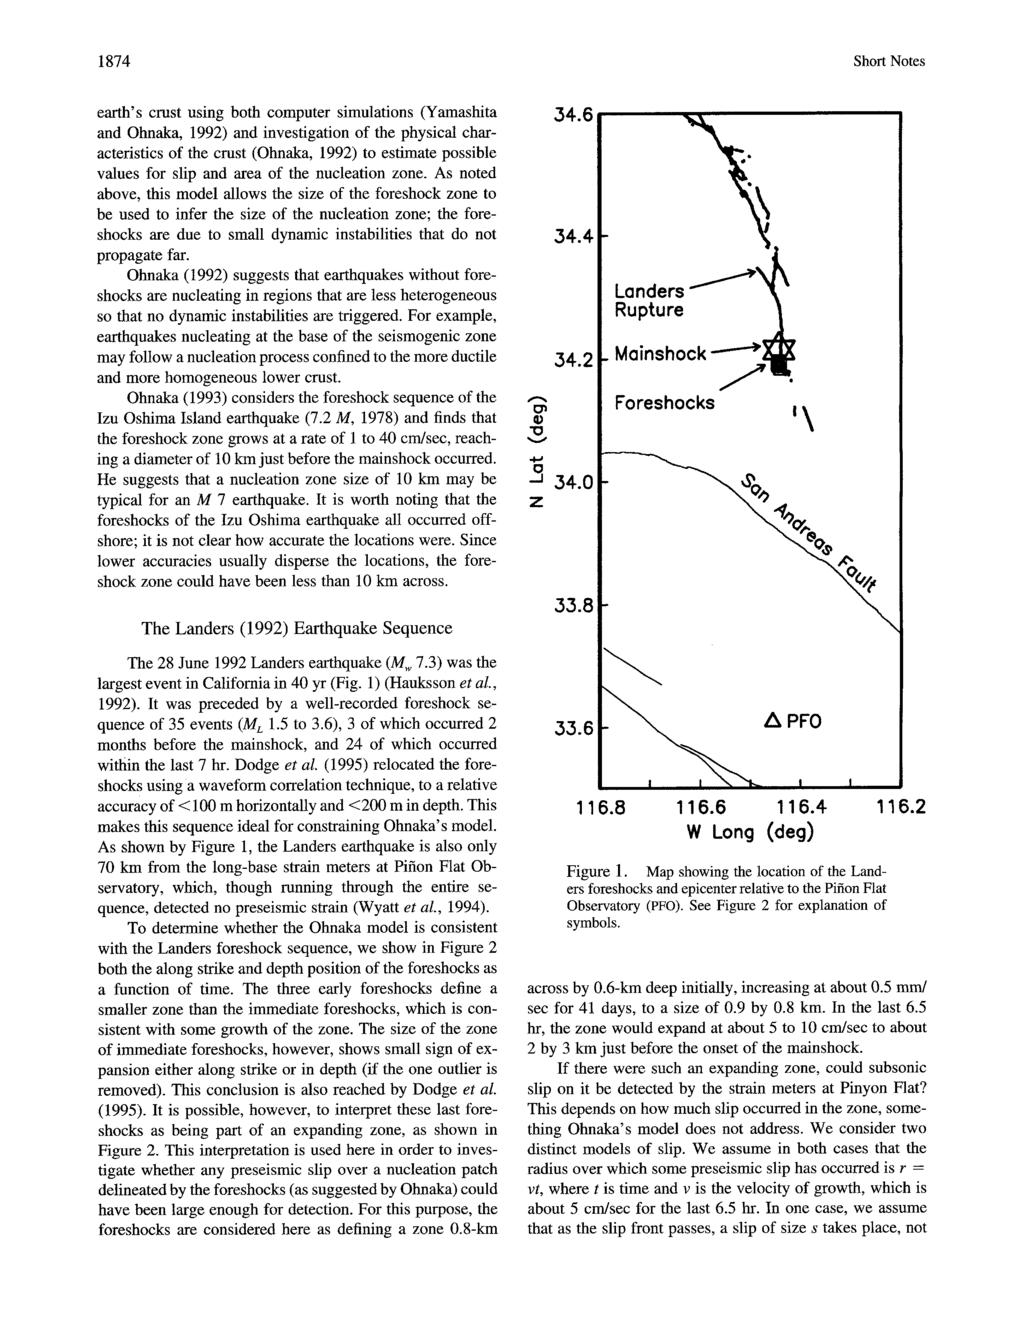 1874 Short Notes earth's crust using both computer simulations (Yamashita and Ohnaka, 1992) and investigation o the physical characteristics o the crust (Ohnaka, 1992) to estimate possible values or